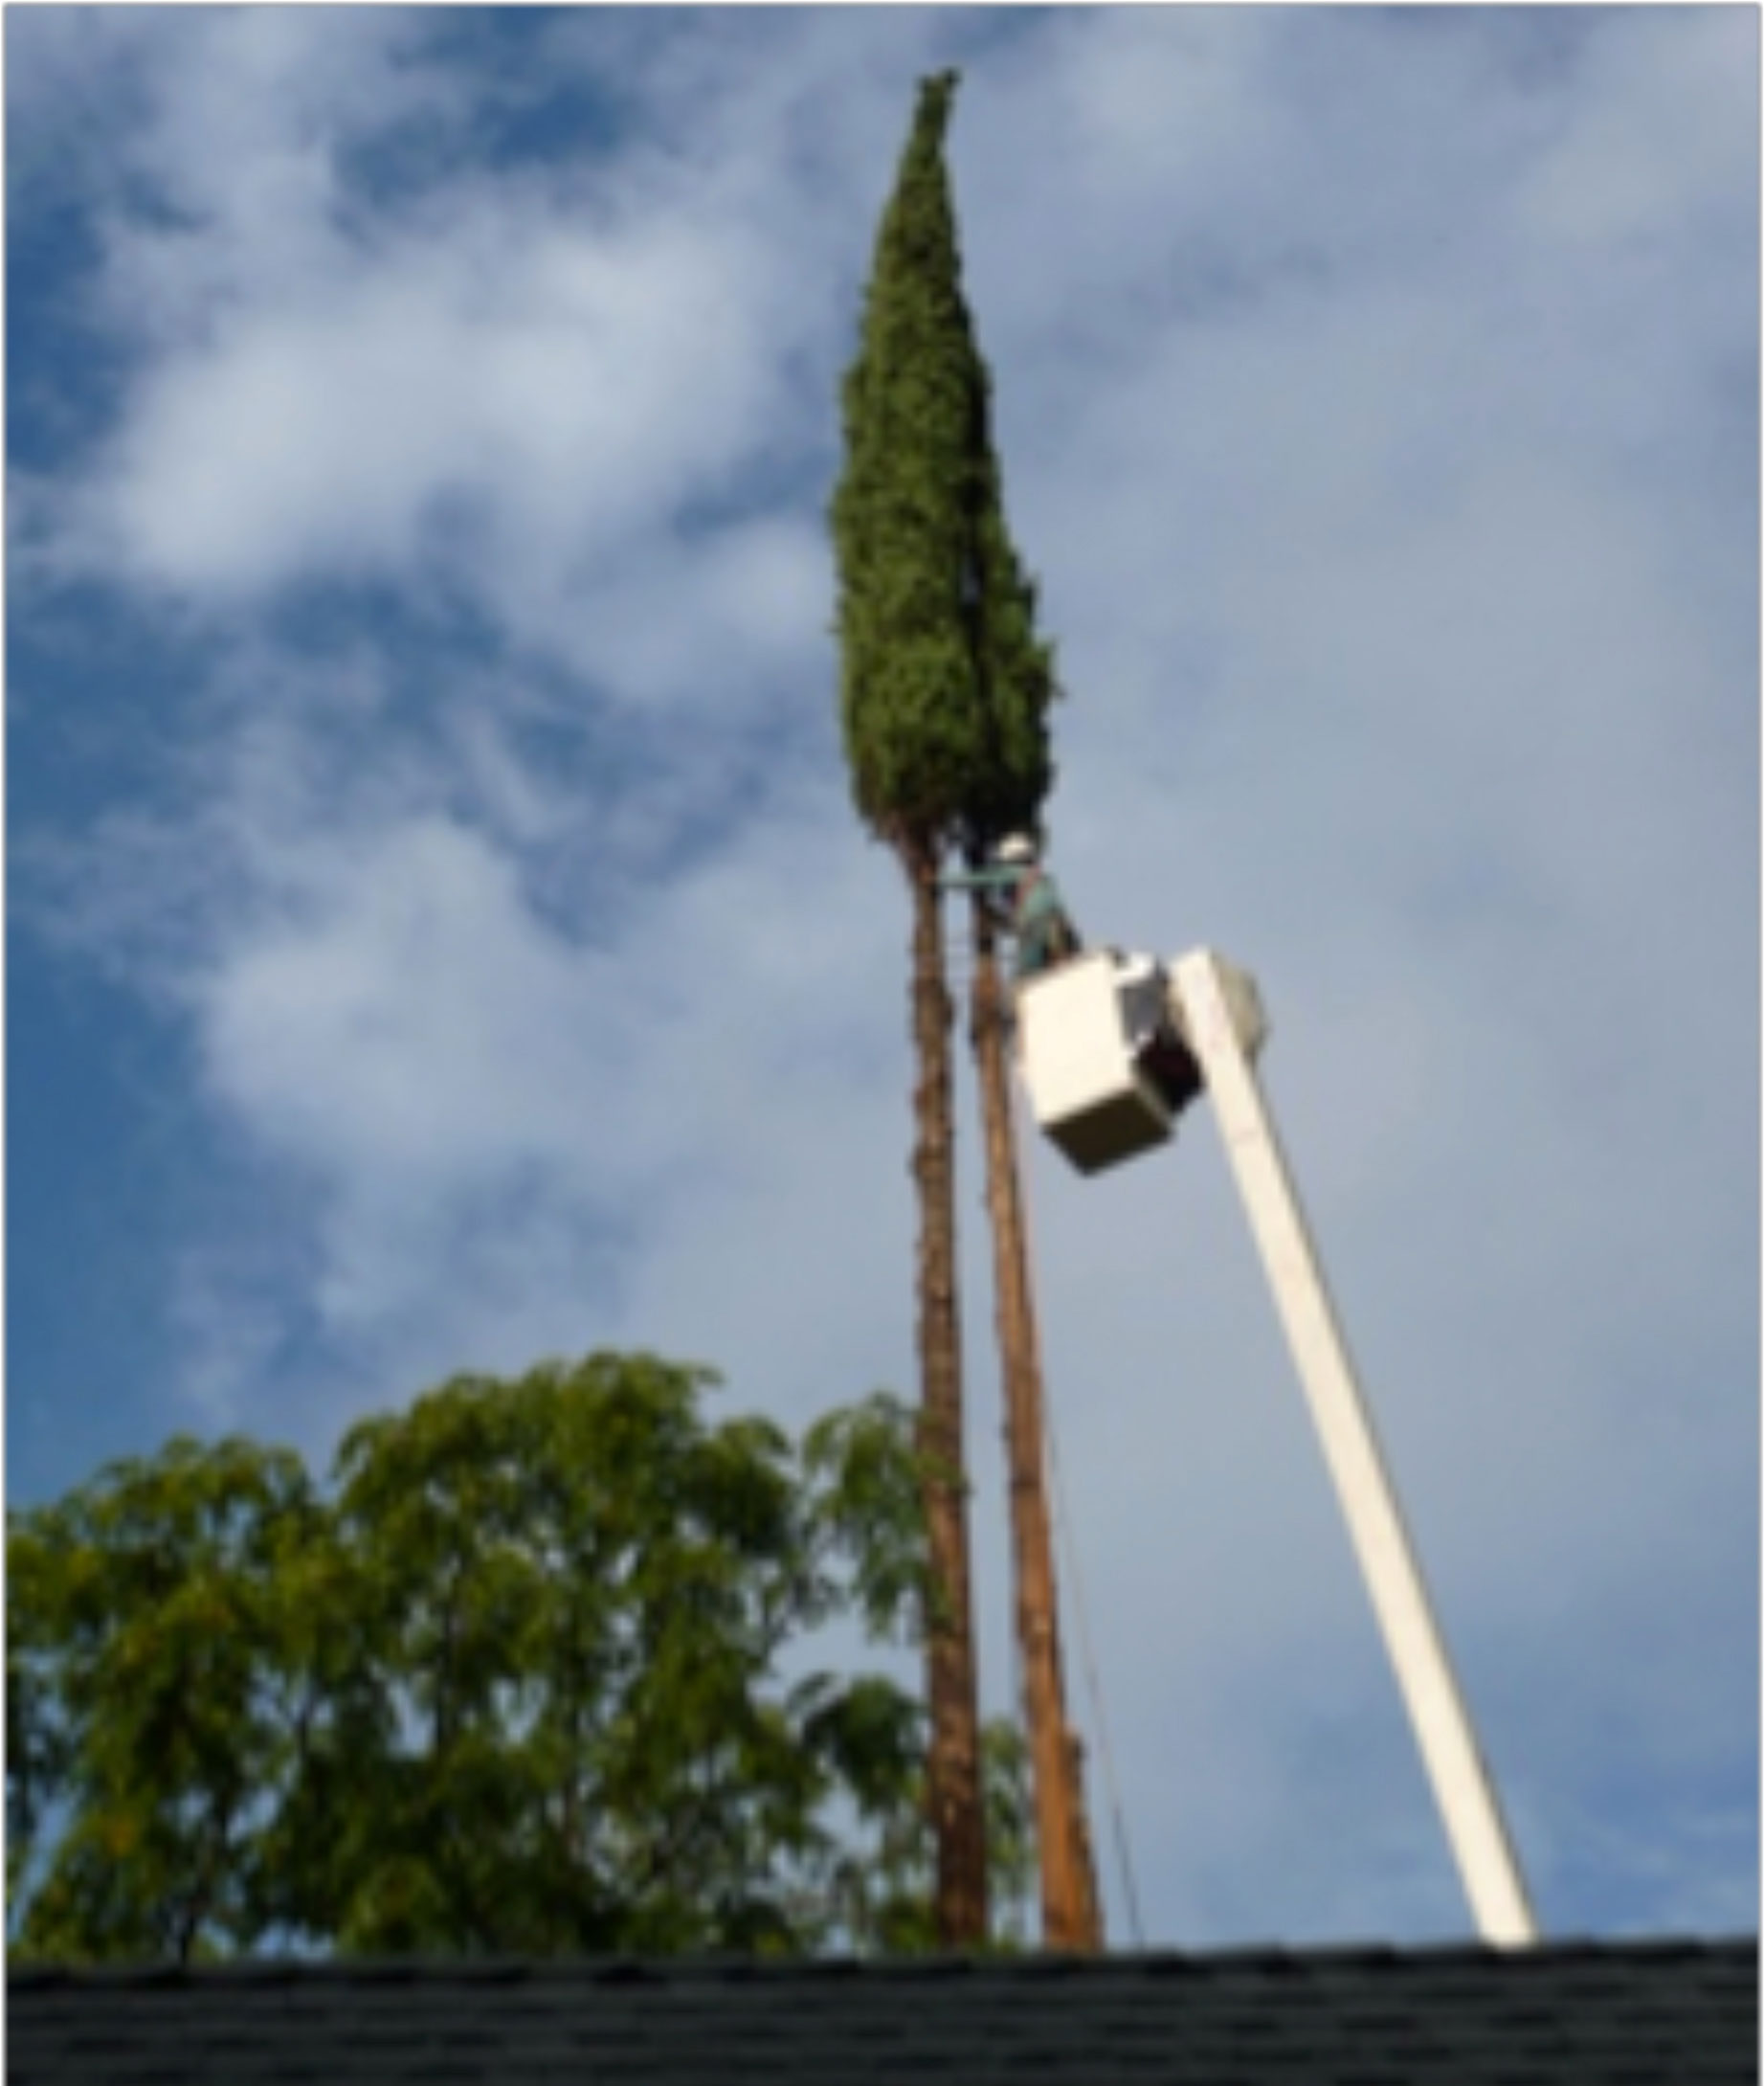 Patitucci Tree Trimming and Removal, Inc.